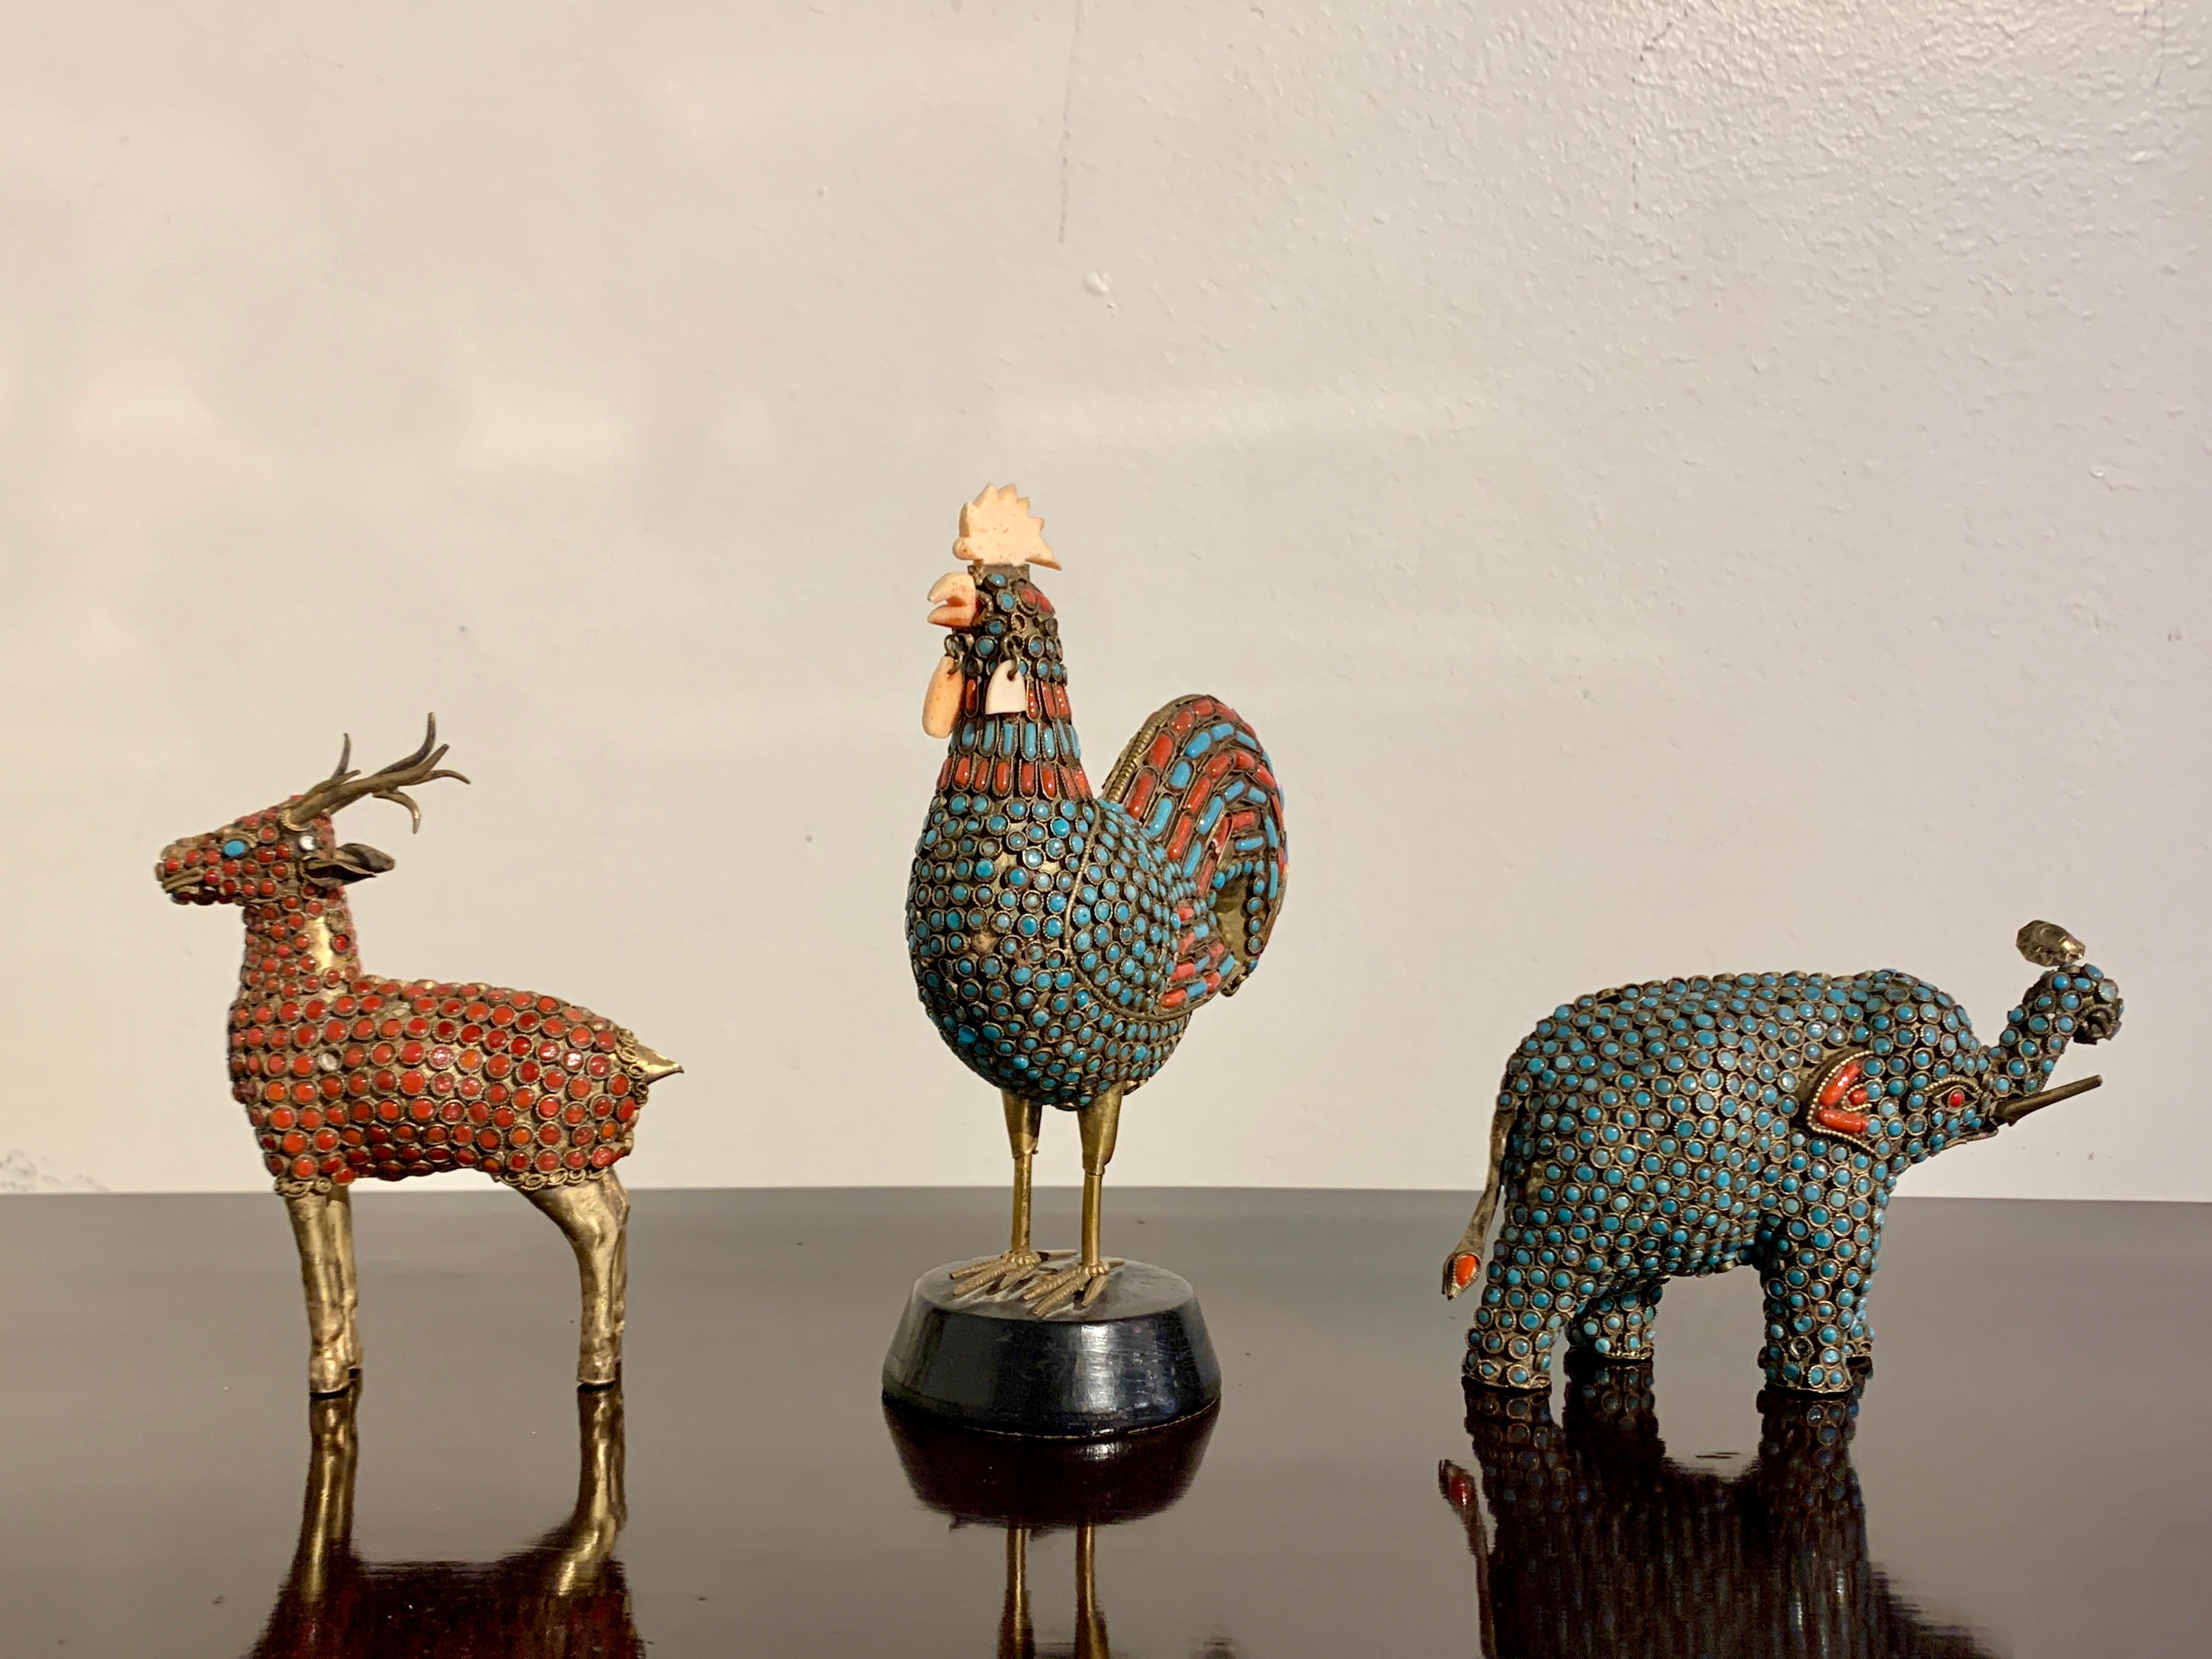 A charming group of three vintage Nepalese brass and inlaid glass bead animals, consisting of a rooster, a deer, and an elephant, 1970's, Nepal.

All three animals crafted in the traditional manner, made out of brass sheet and wire, and inlaid